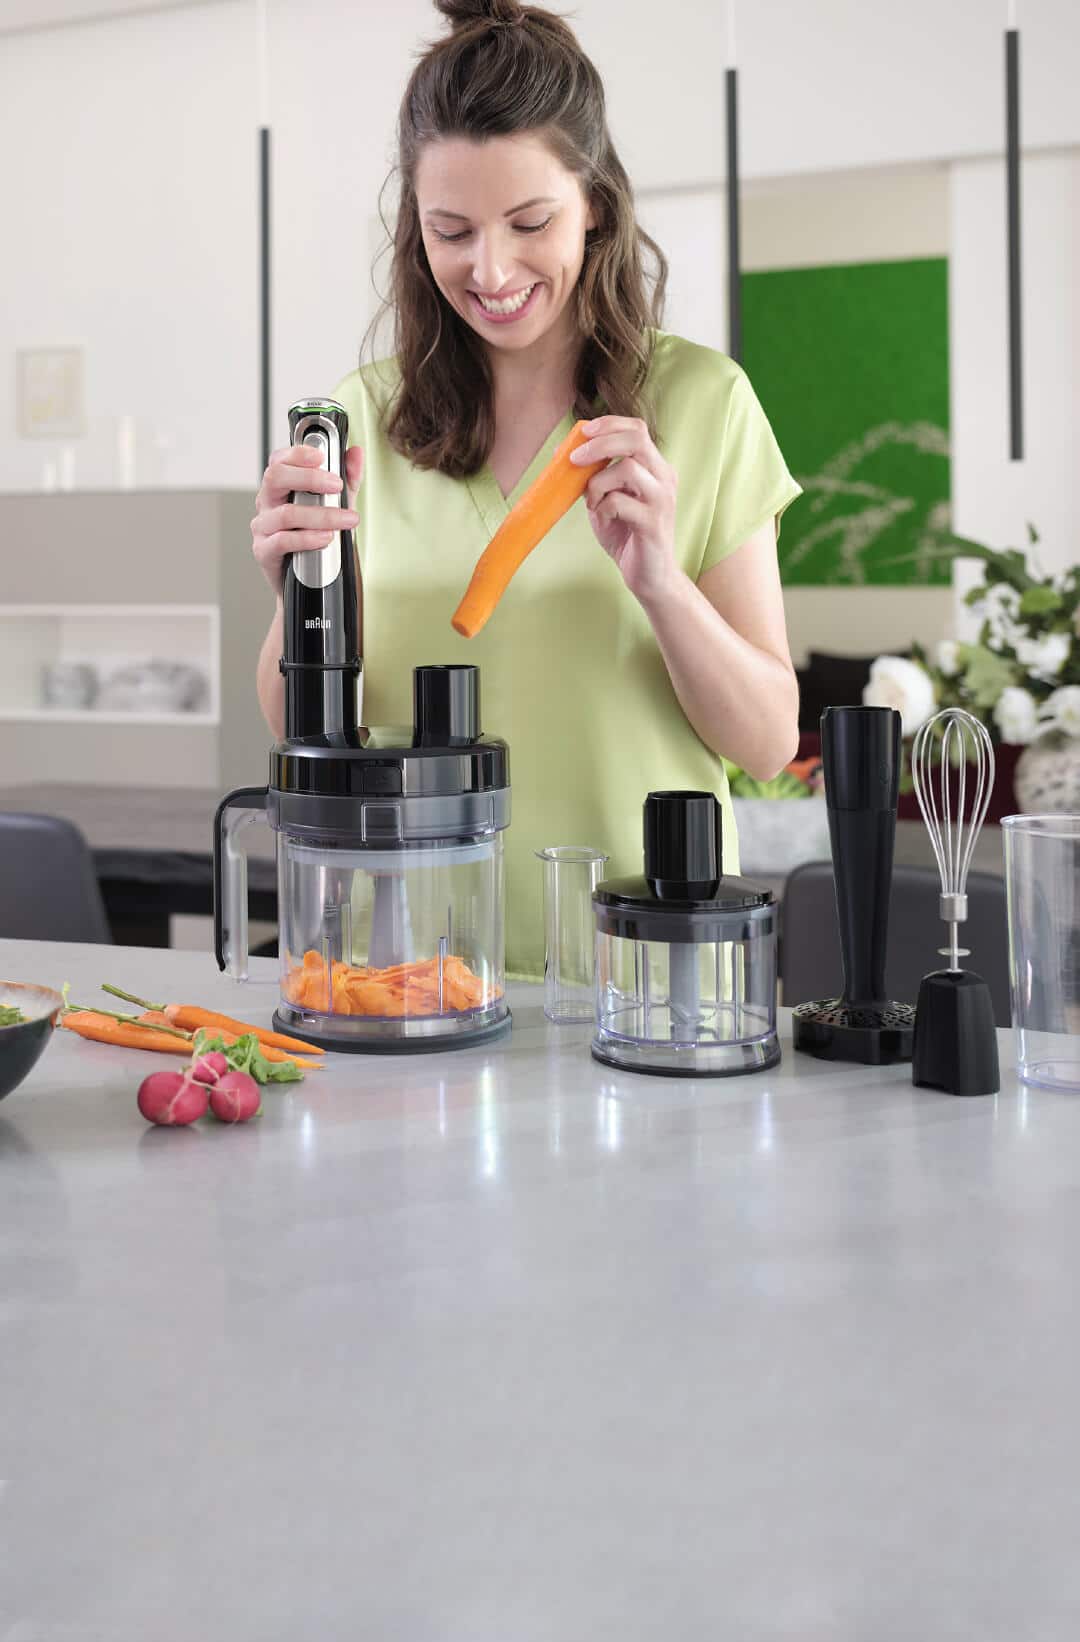 Braun MultiQuick 9X Hand blender - Braun‘s most powerful and best performing.